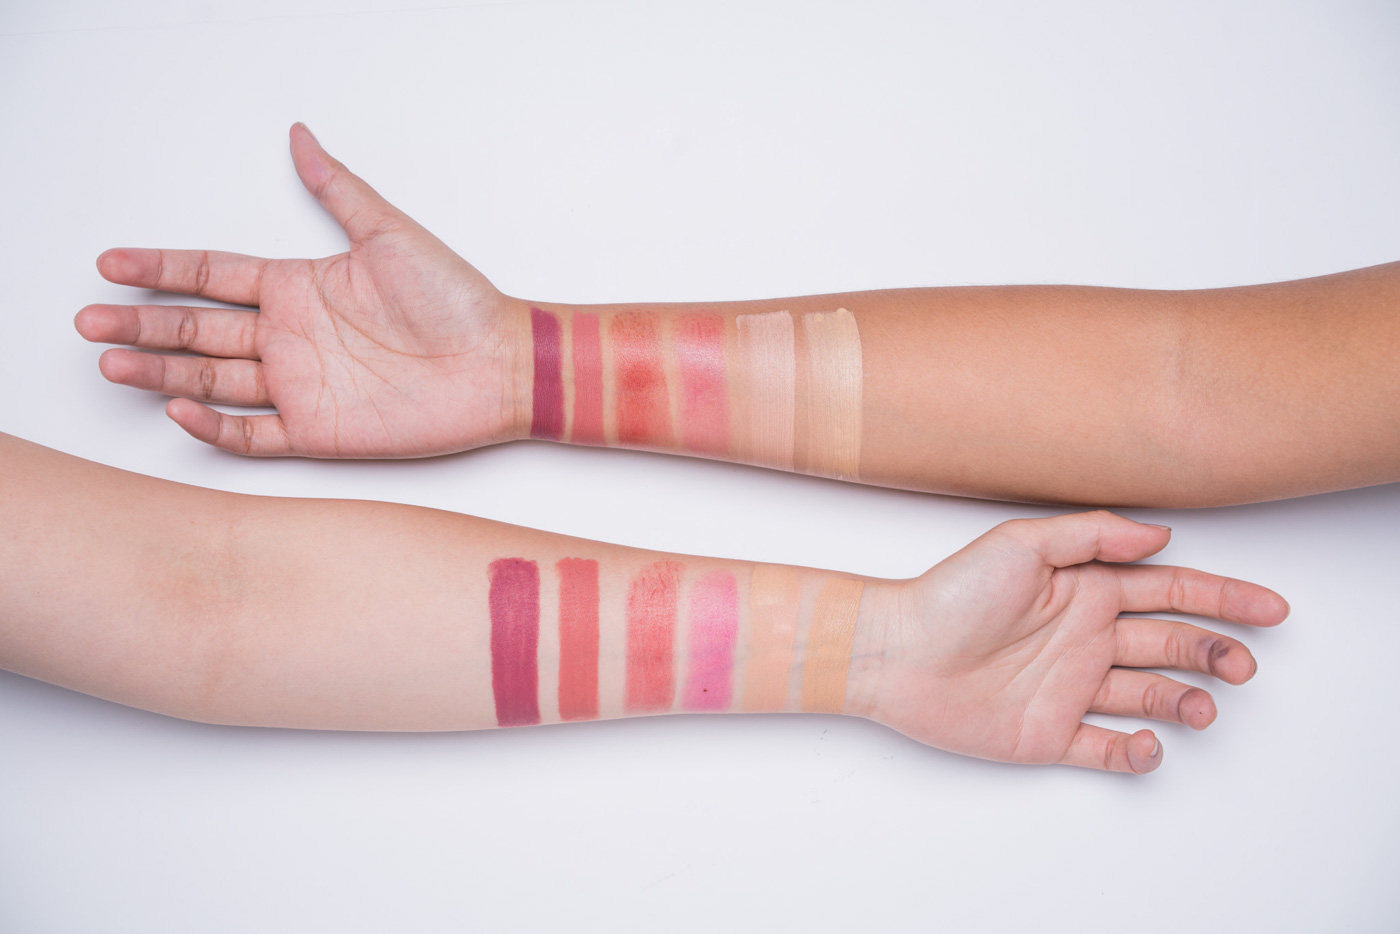 SWATCHES. Left to right: Shut Up & Kiss Me Moisturizing Matte Lippie in Forever Summer; Shut Up & Kiss Me Moisturizing Matte Lippie in Lost in Paradise; Pinch Me Summer-Proof Natural Lip & Cheek Stick in Cherry Glow; Pinch Me Summer-Proof Natural Lip & Cheek Stick in Berry Fresh; Good To Go Five Minute Fresh Face Summer-Proof Foundation & Concealer in Medium; Good To Go Five Minute Fresh Face Summer-Proof Foundation & Concealer in Light. 